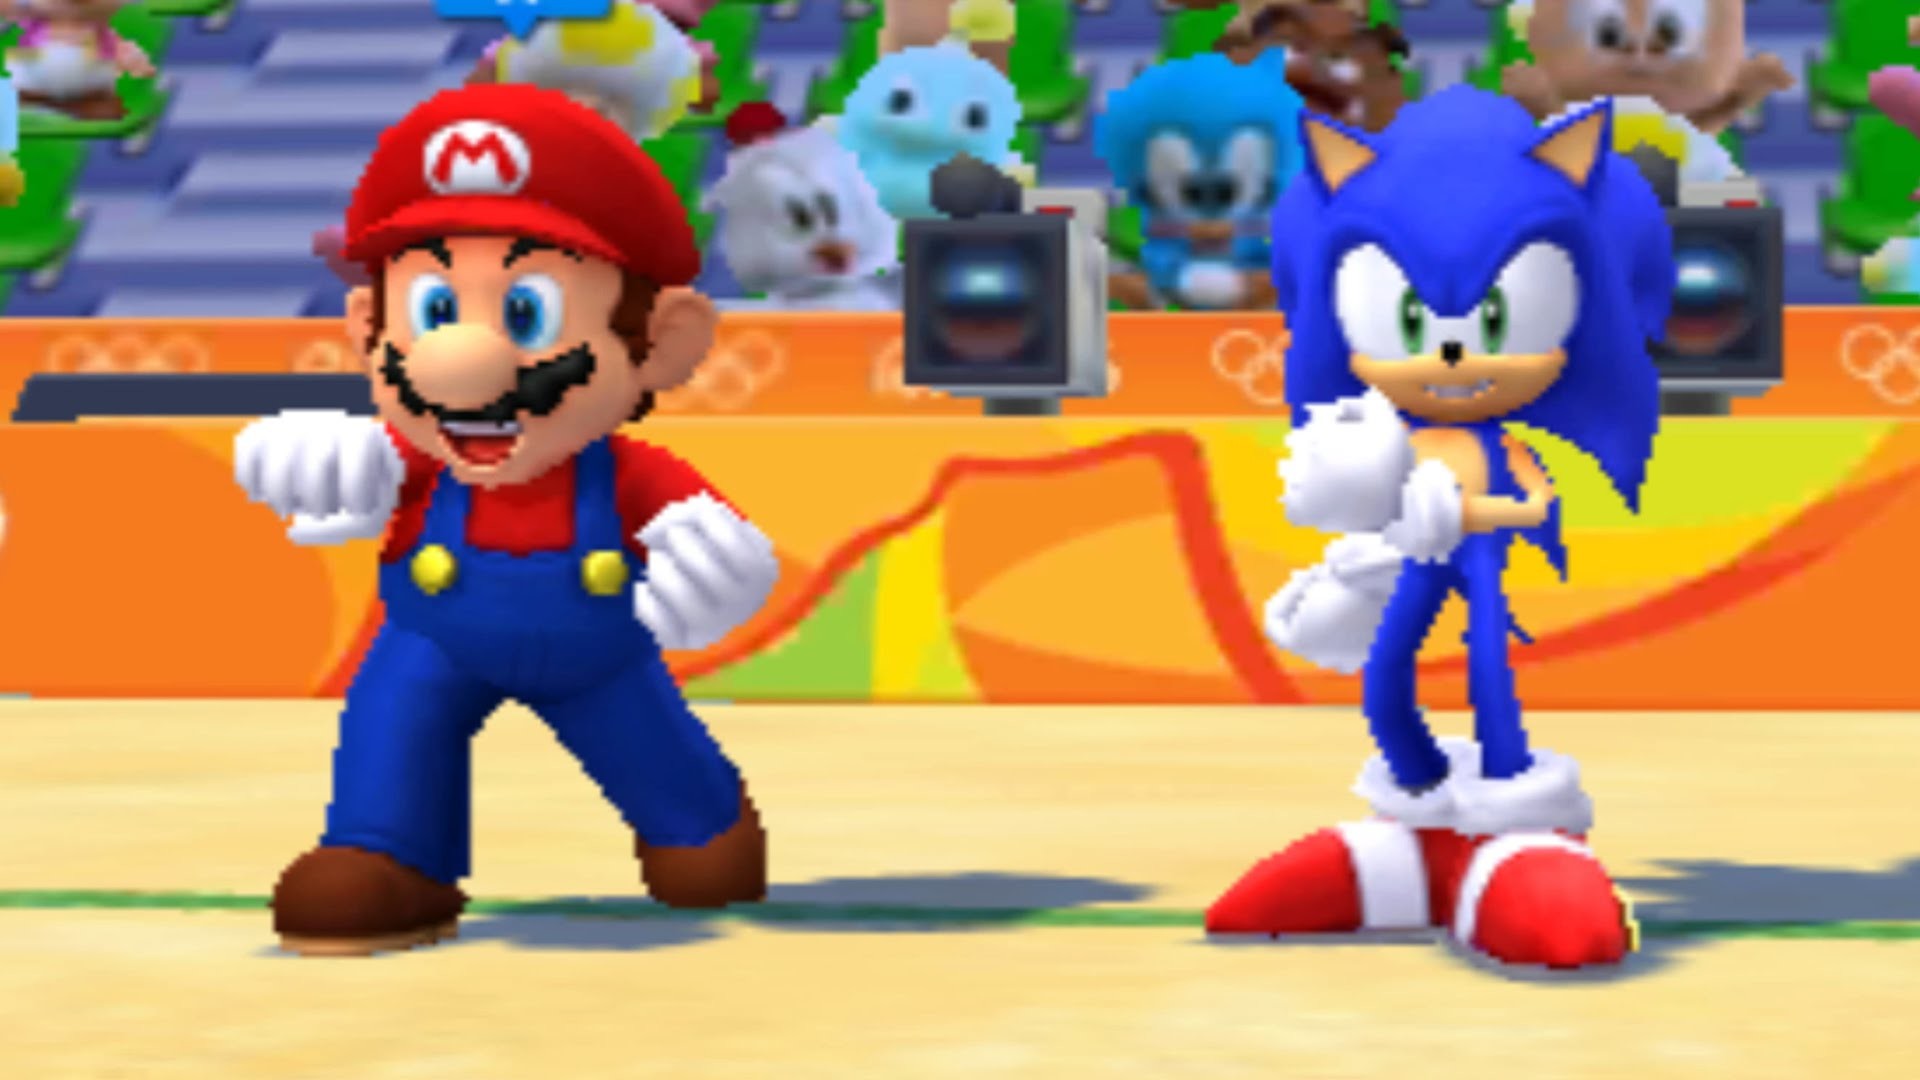 1920x1080 Mario and Sonic at the Rio 2016 Olympic Games - All Events (3DS) - YouTube